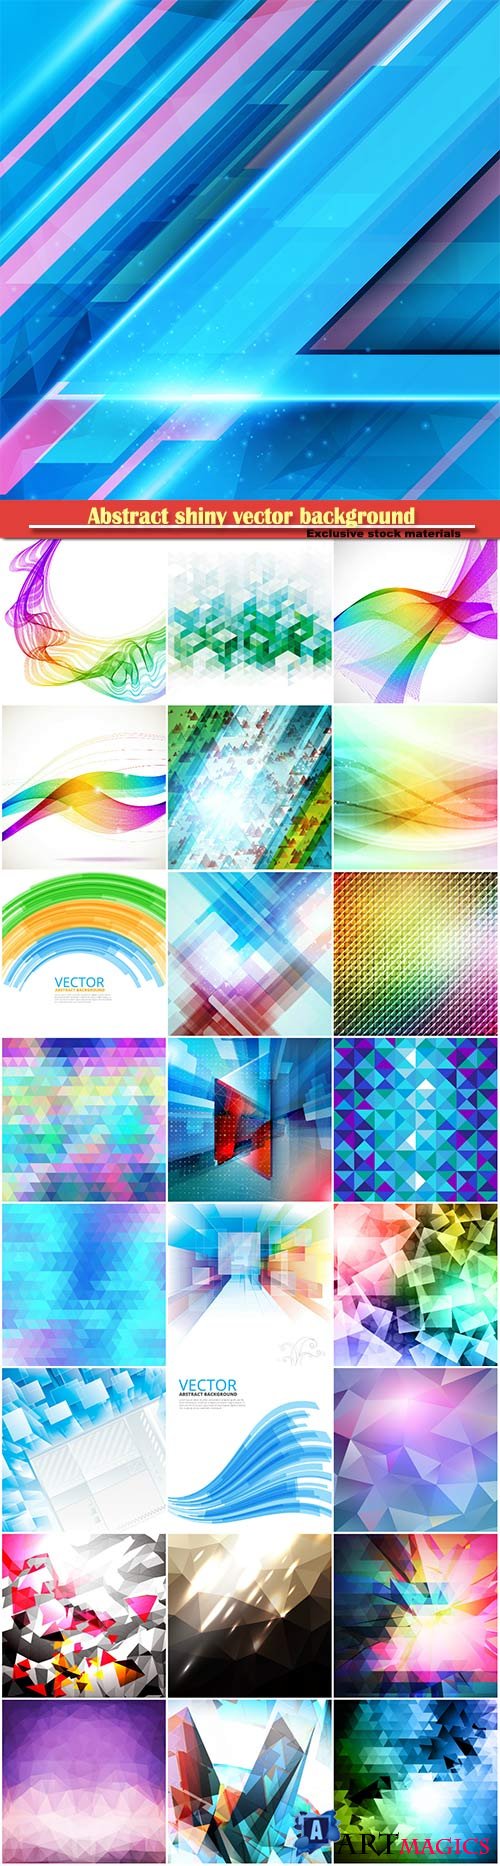 Abstract shiny vector background